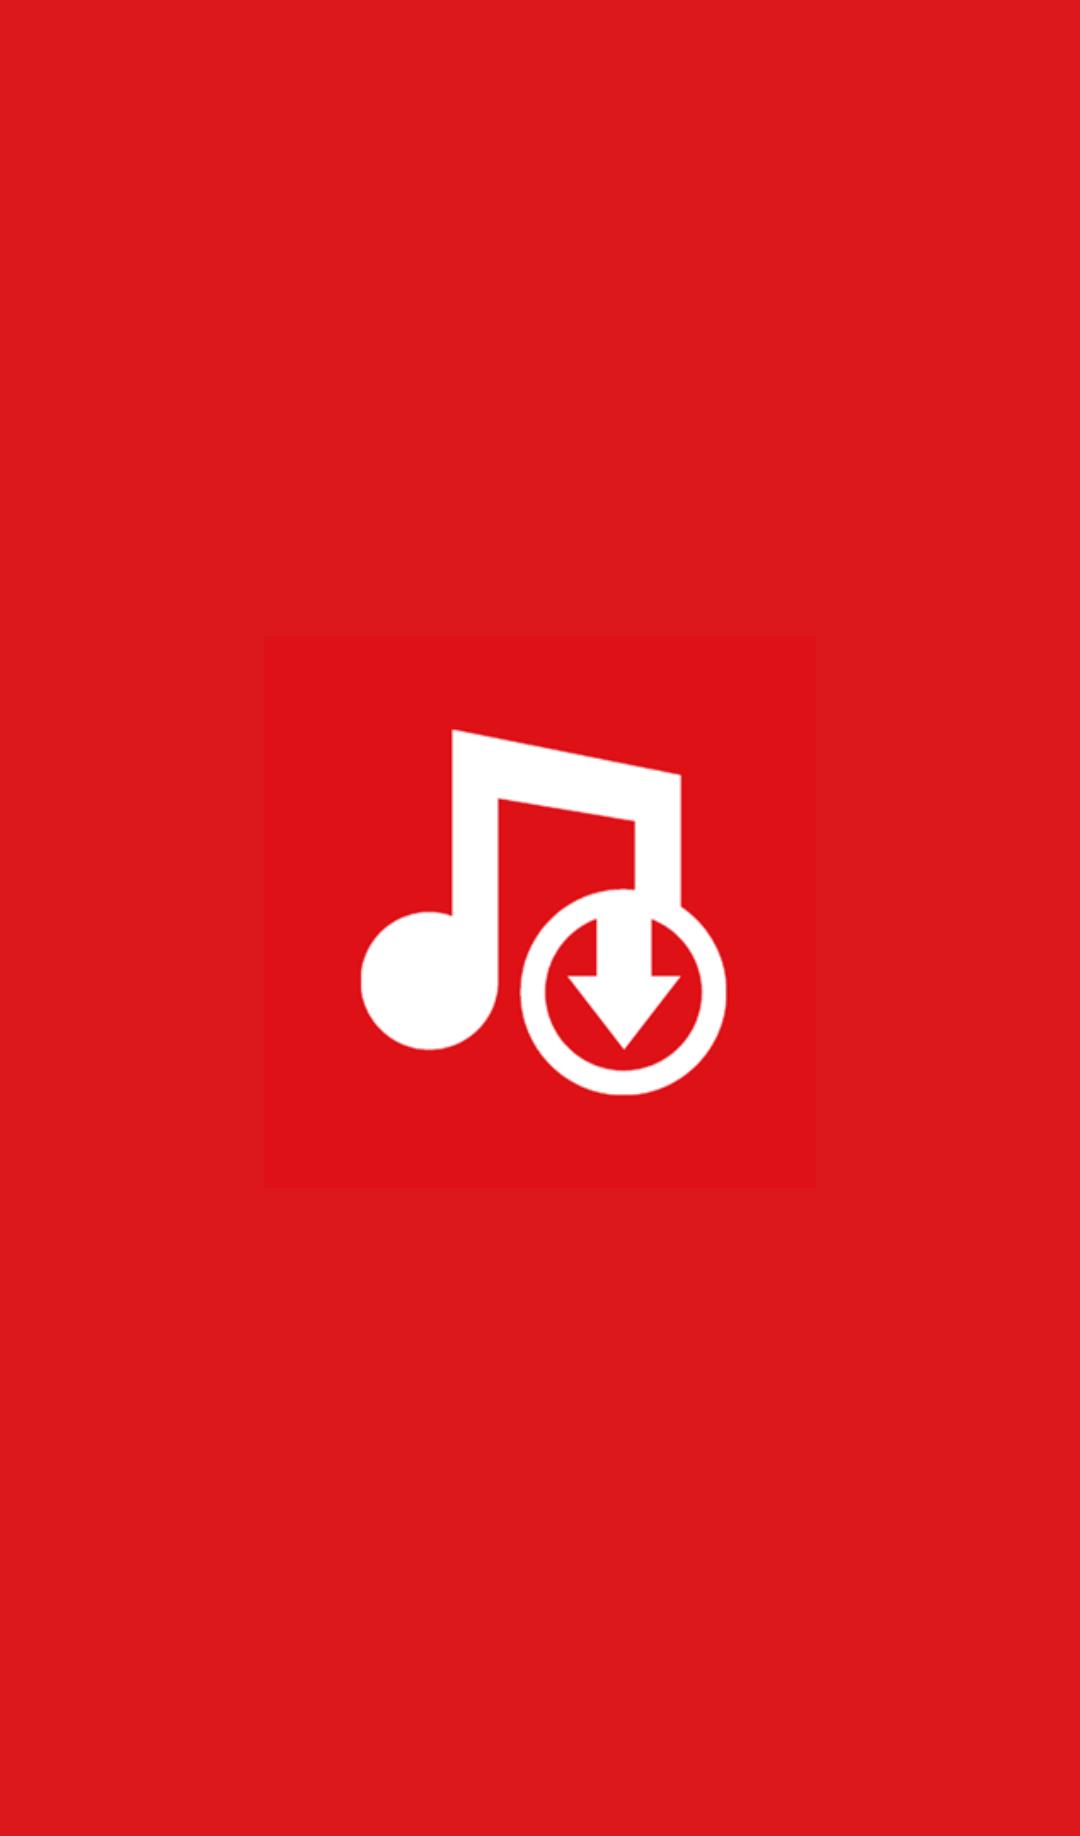 Y2 Mp3 Download Free Music for Android - APK Download